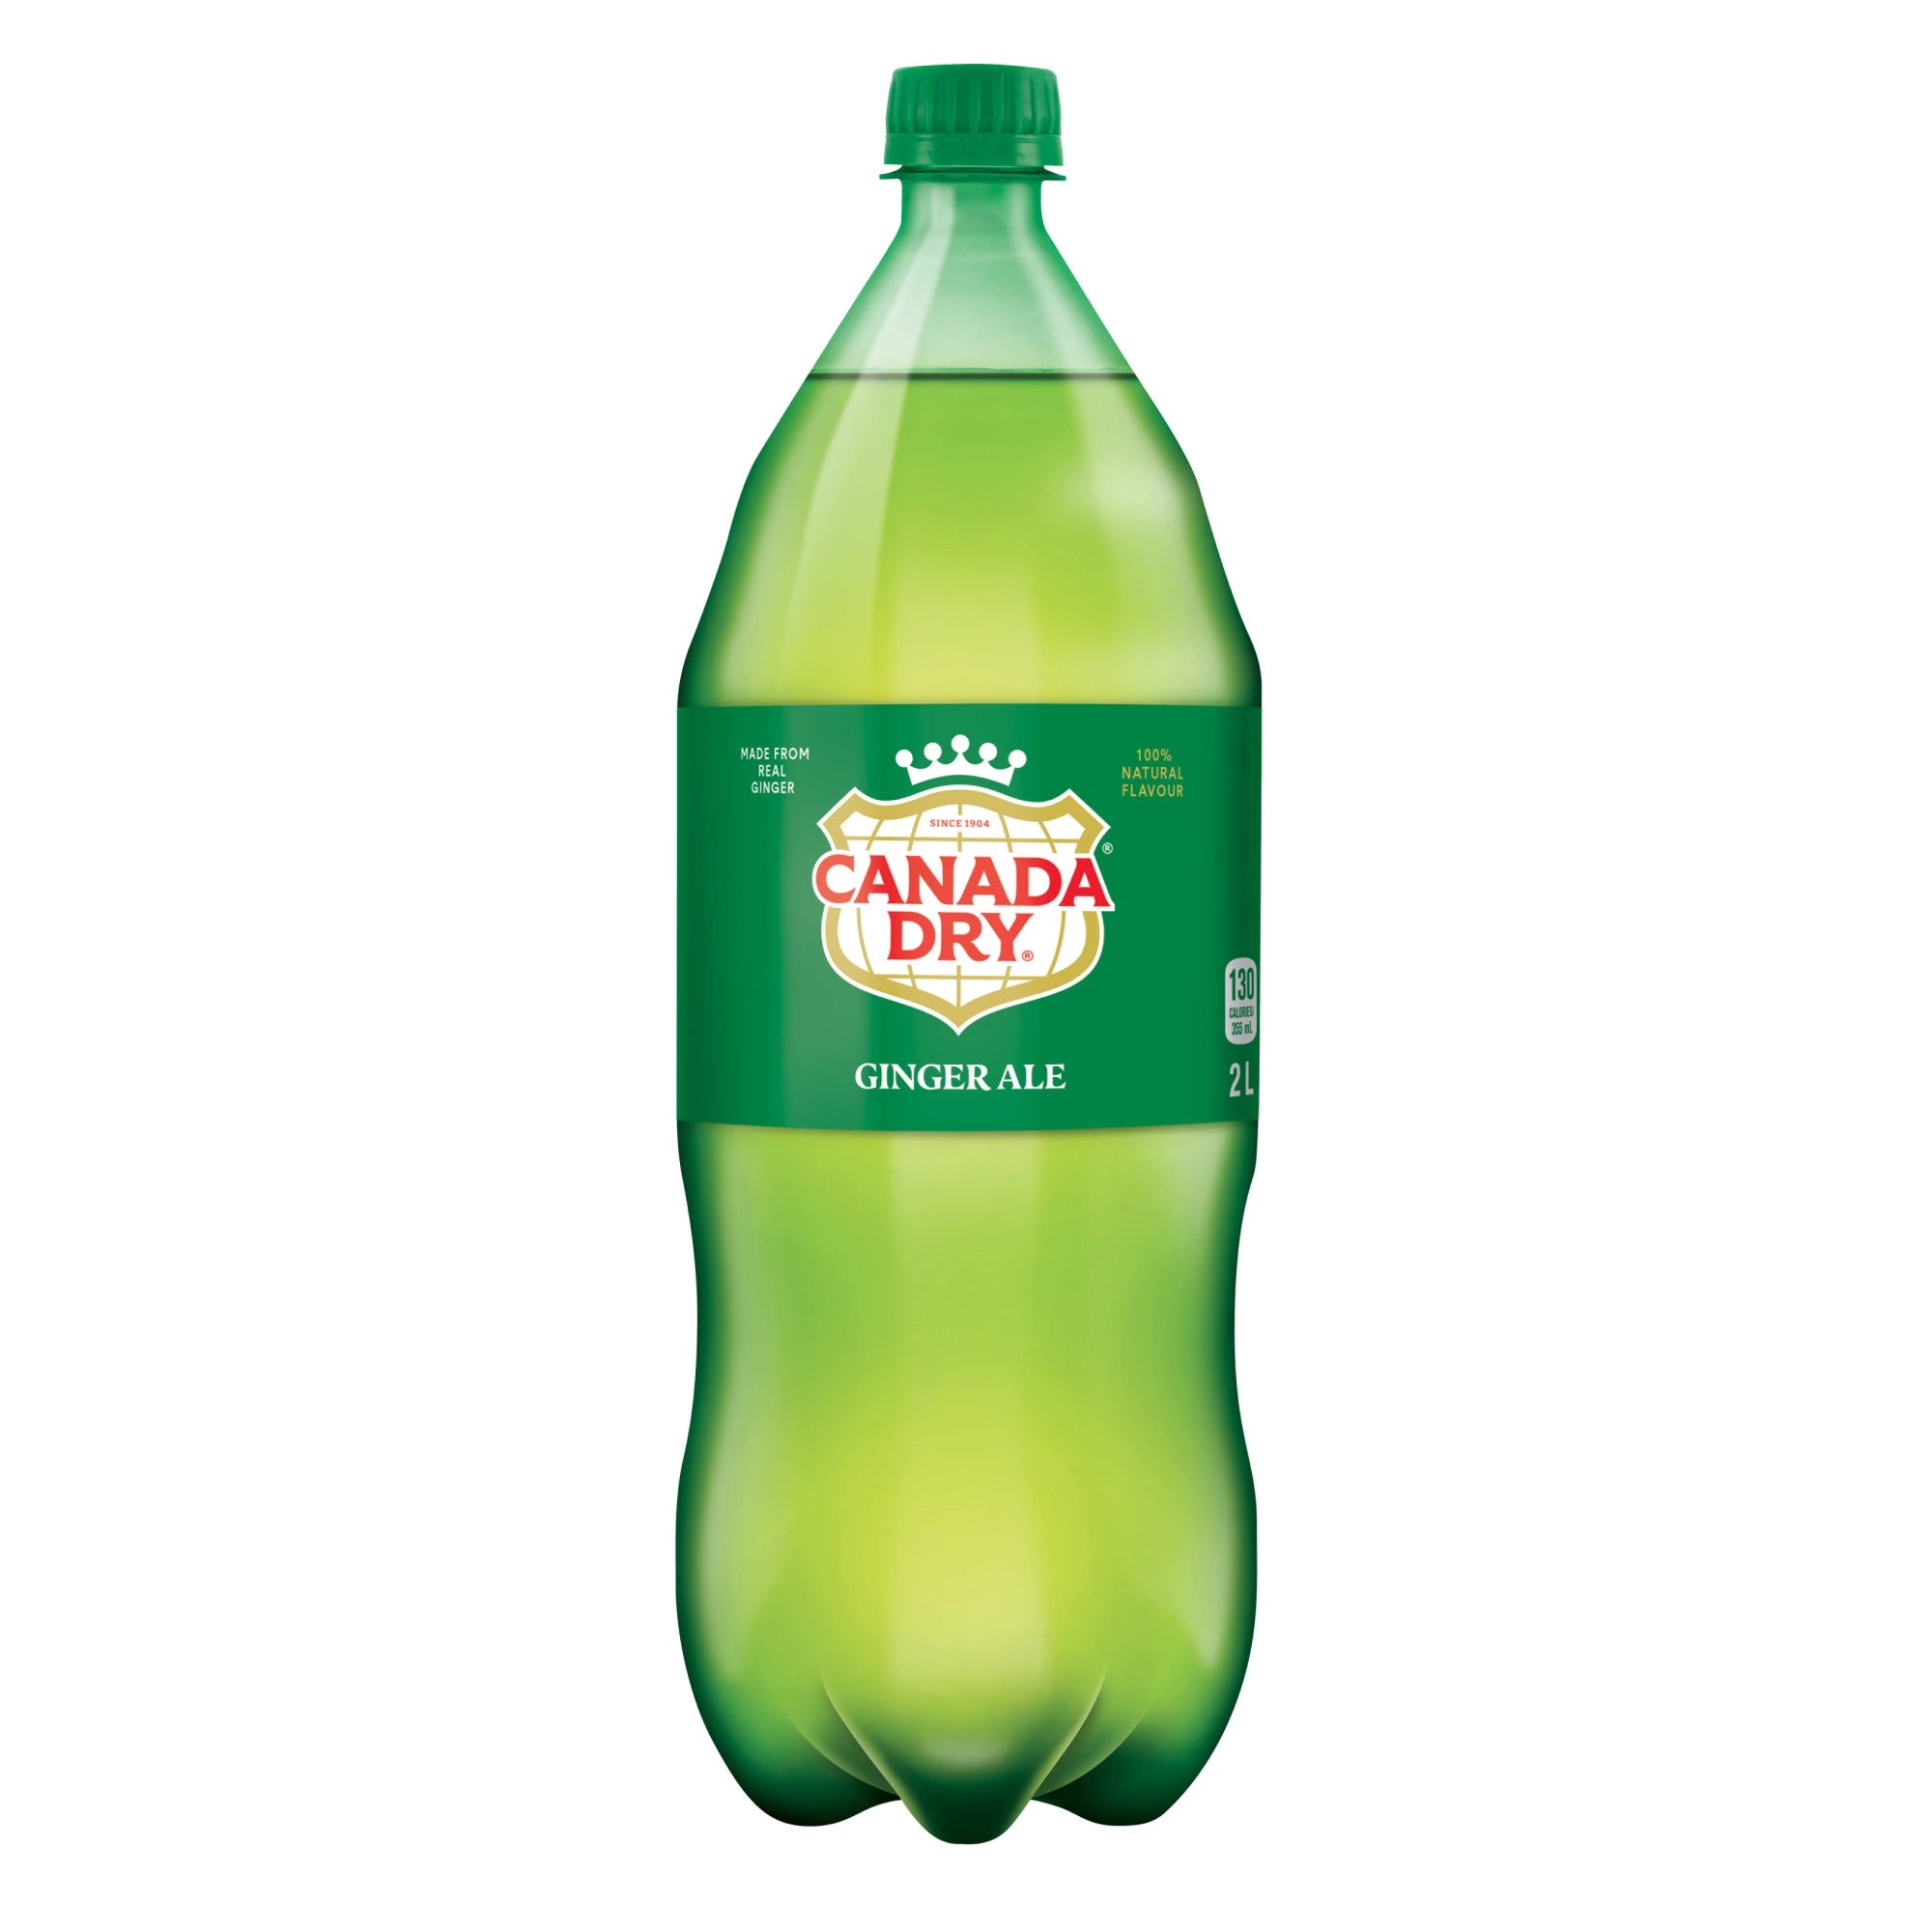 CANADA DRY GINGER ALE 2L BT